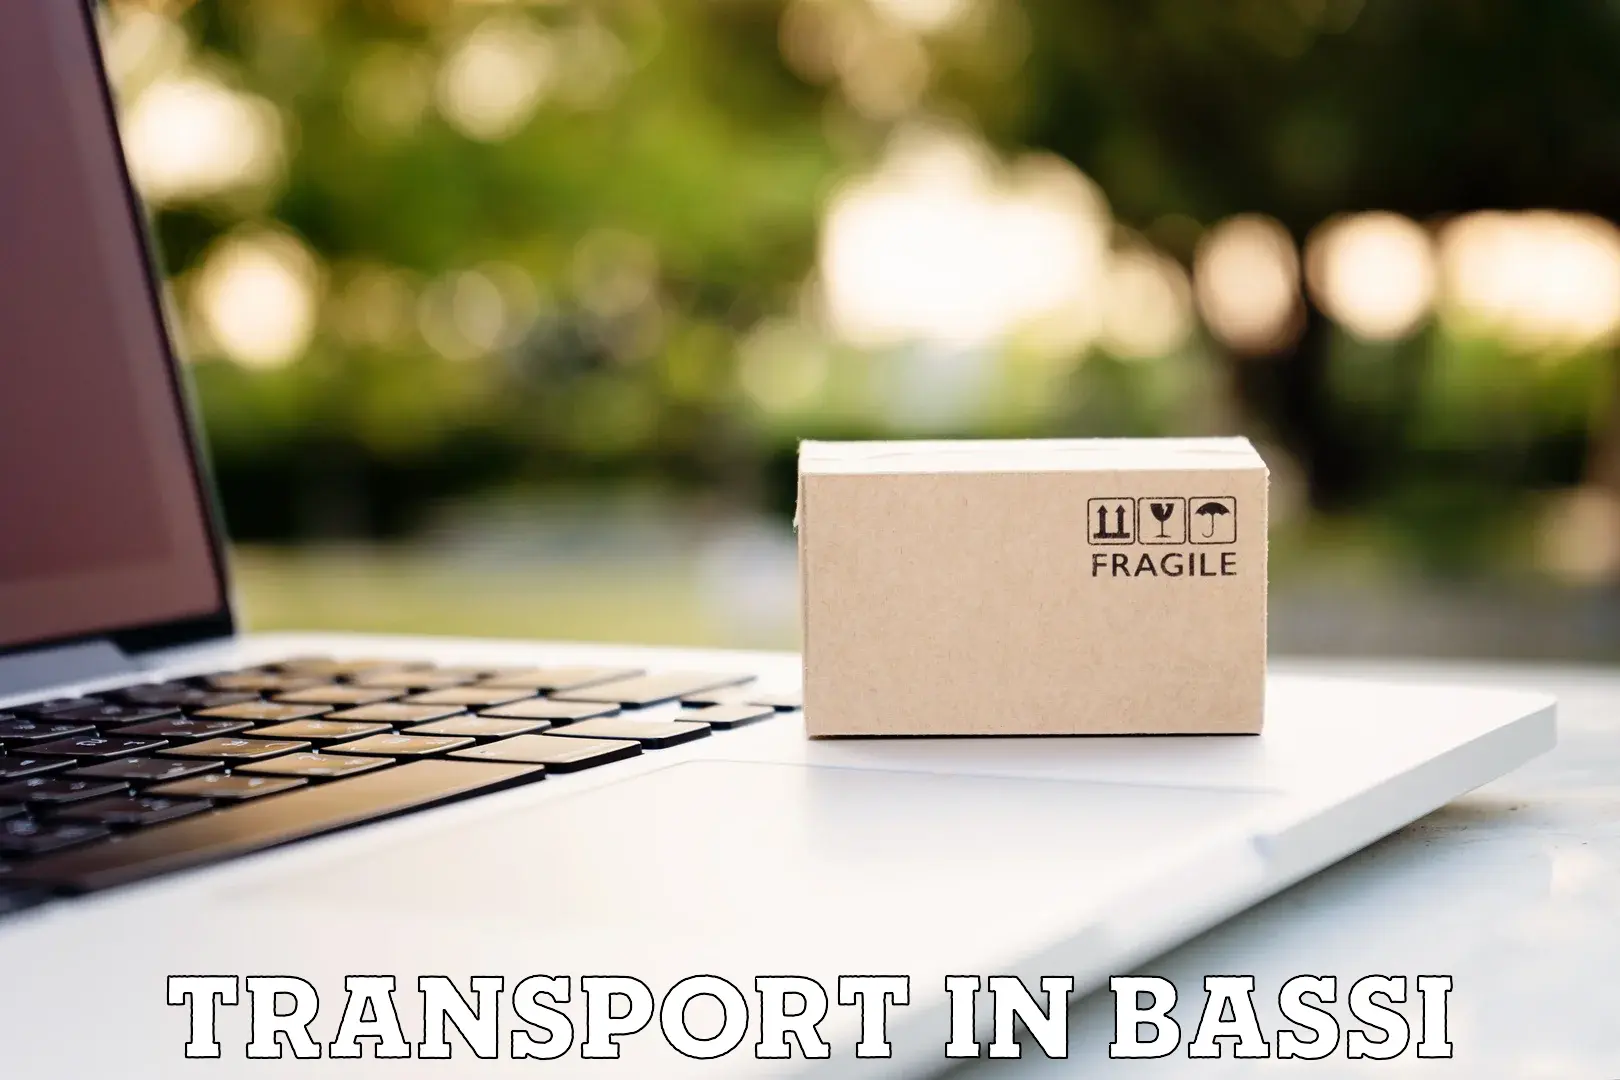 Transport in sharing in Bassi